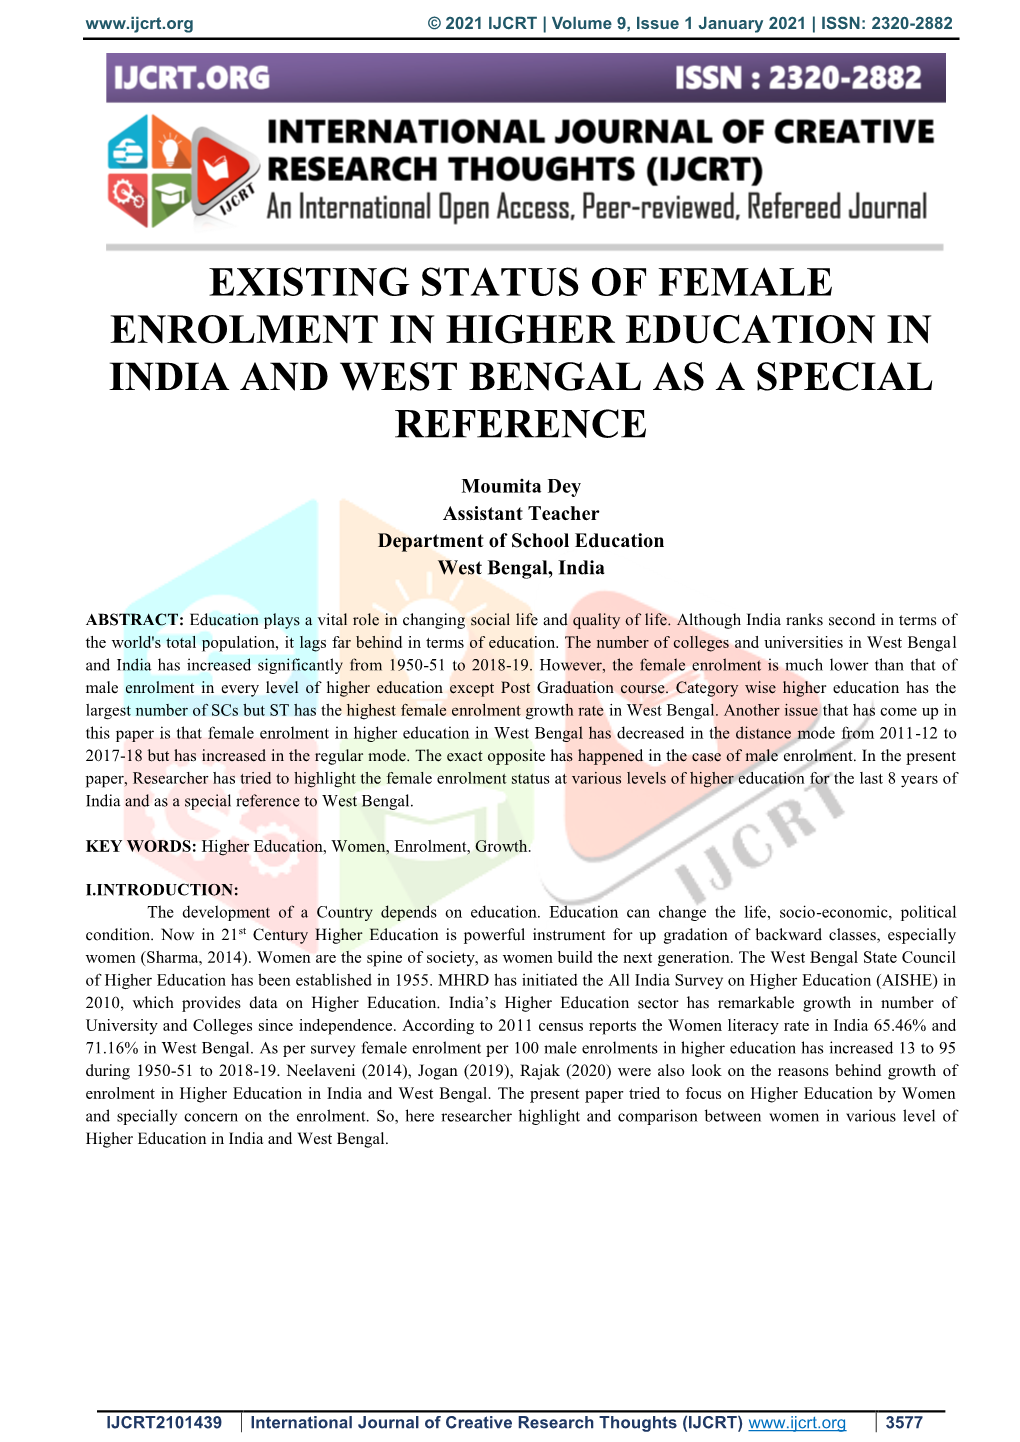 Existing Status of Female Enrolment in Higher Education in India and West Bengal As a Special Reference